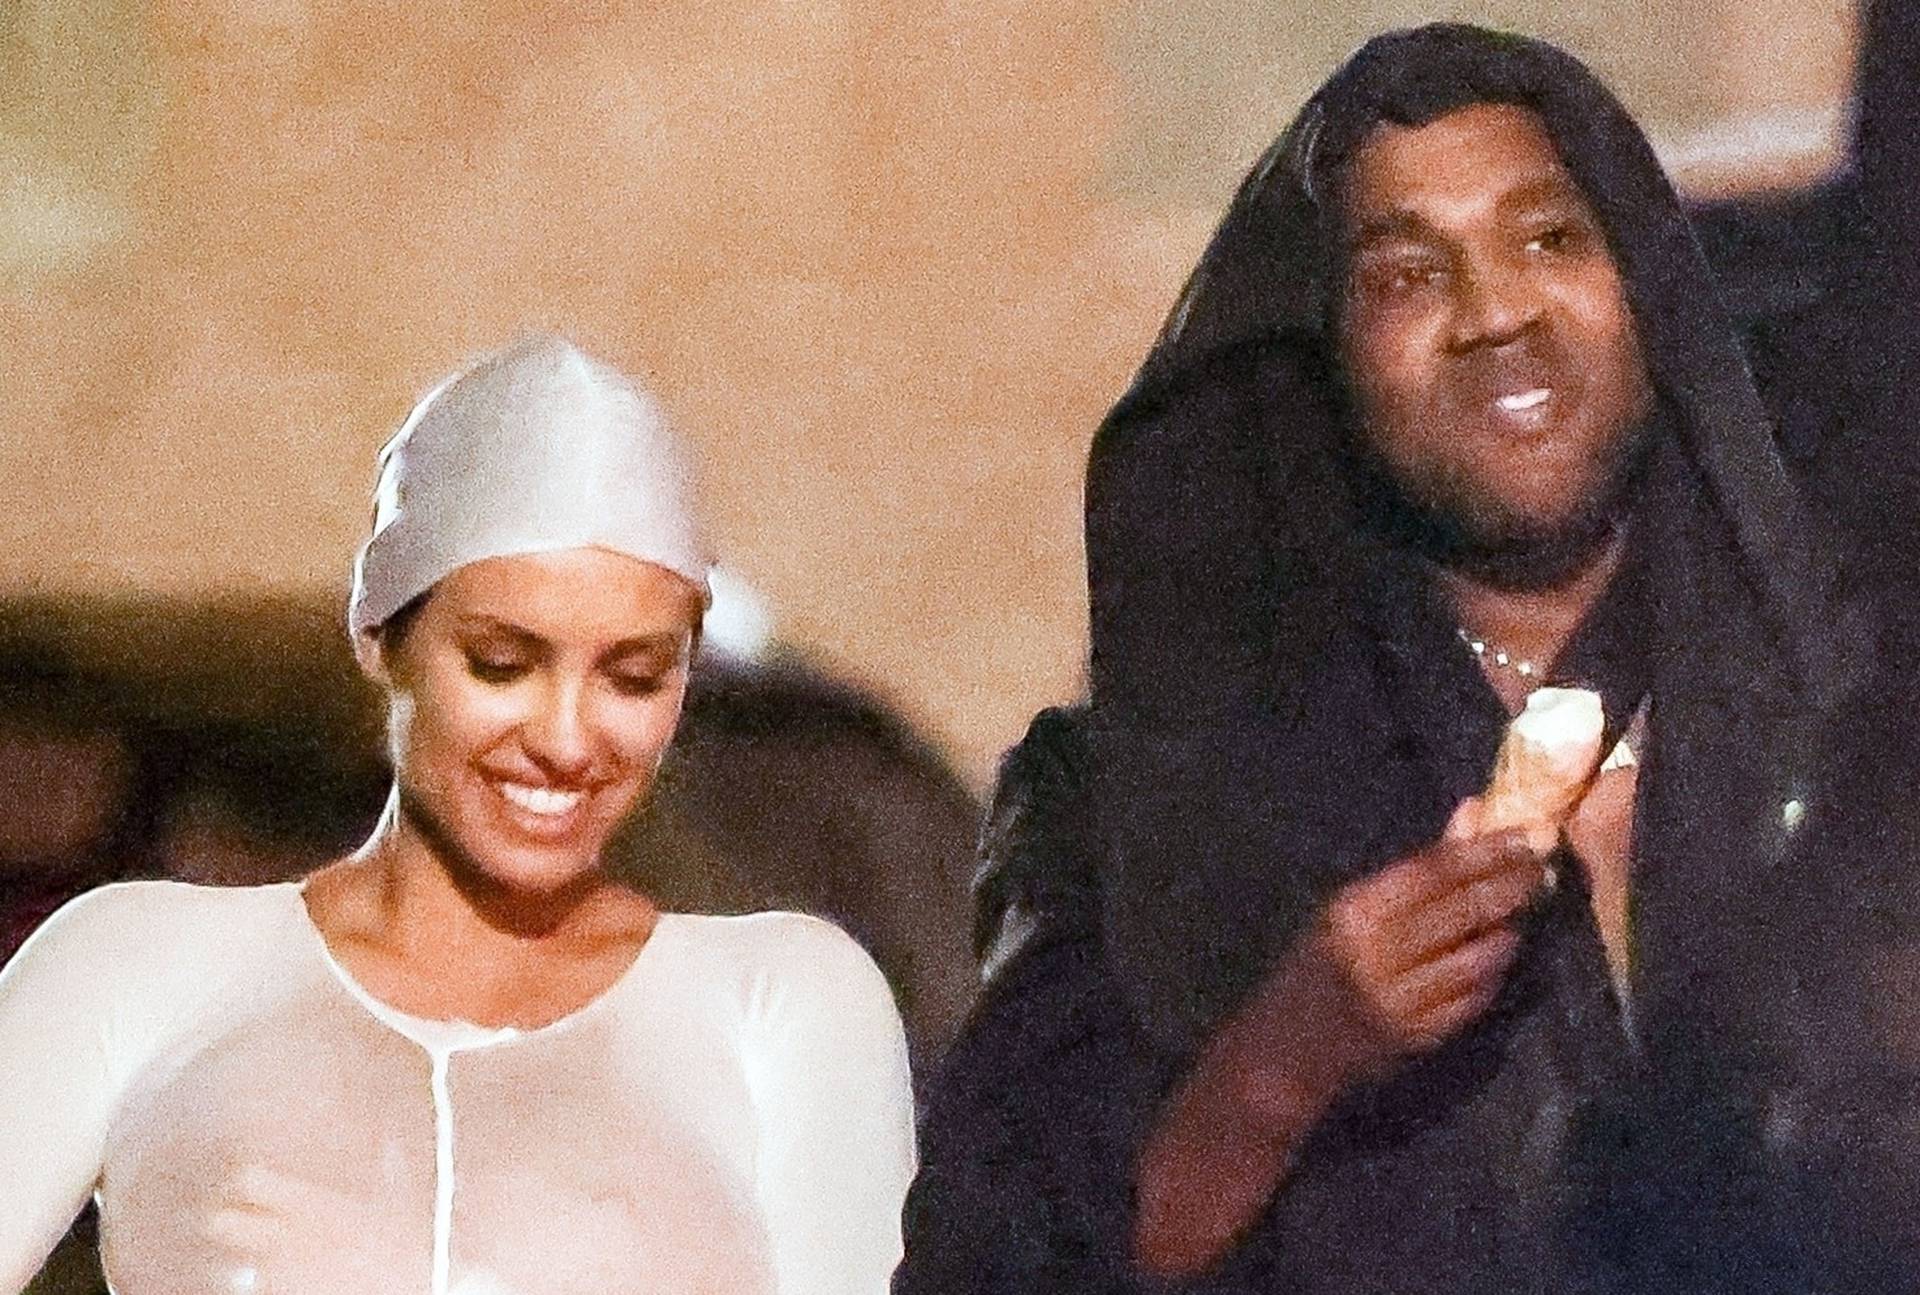 *PREMIUM-EXCLUSIVE* *MUST CALL FOR PRICING* *WEB EMBARGO UNTIL 21:00 HRS UK TIME ON 10/08/23* The American Rapper Kanye West is all smiles looking happy with his reported 'Wife' Bianca Censori as they enjoy cool scrumptious Gelato and take a stroll barefo